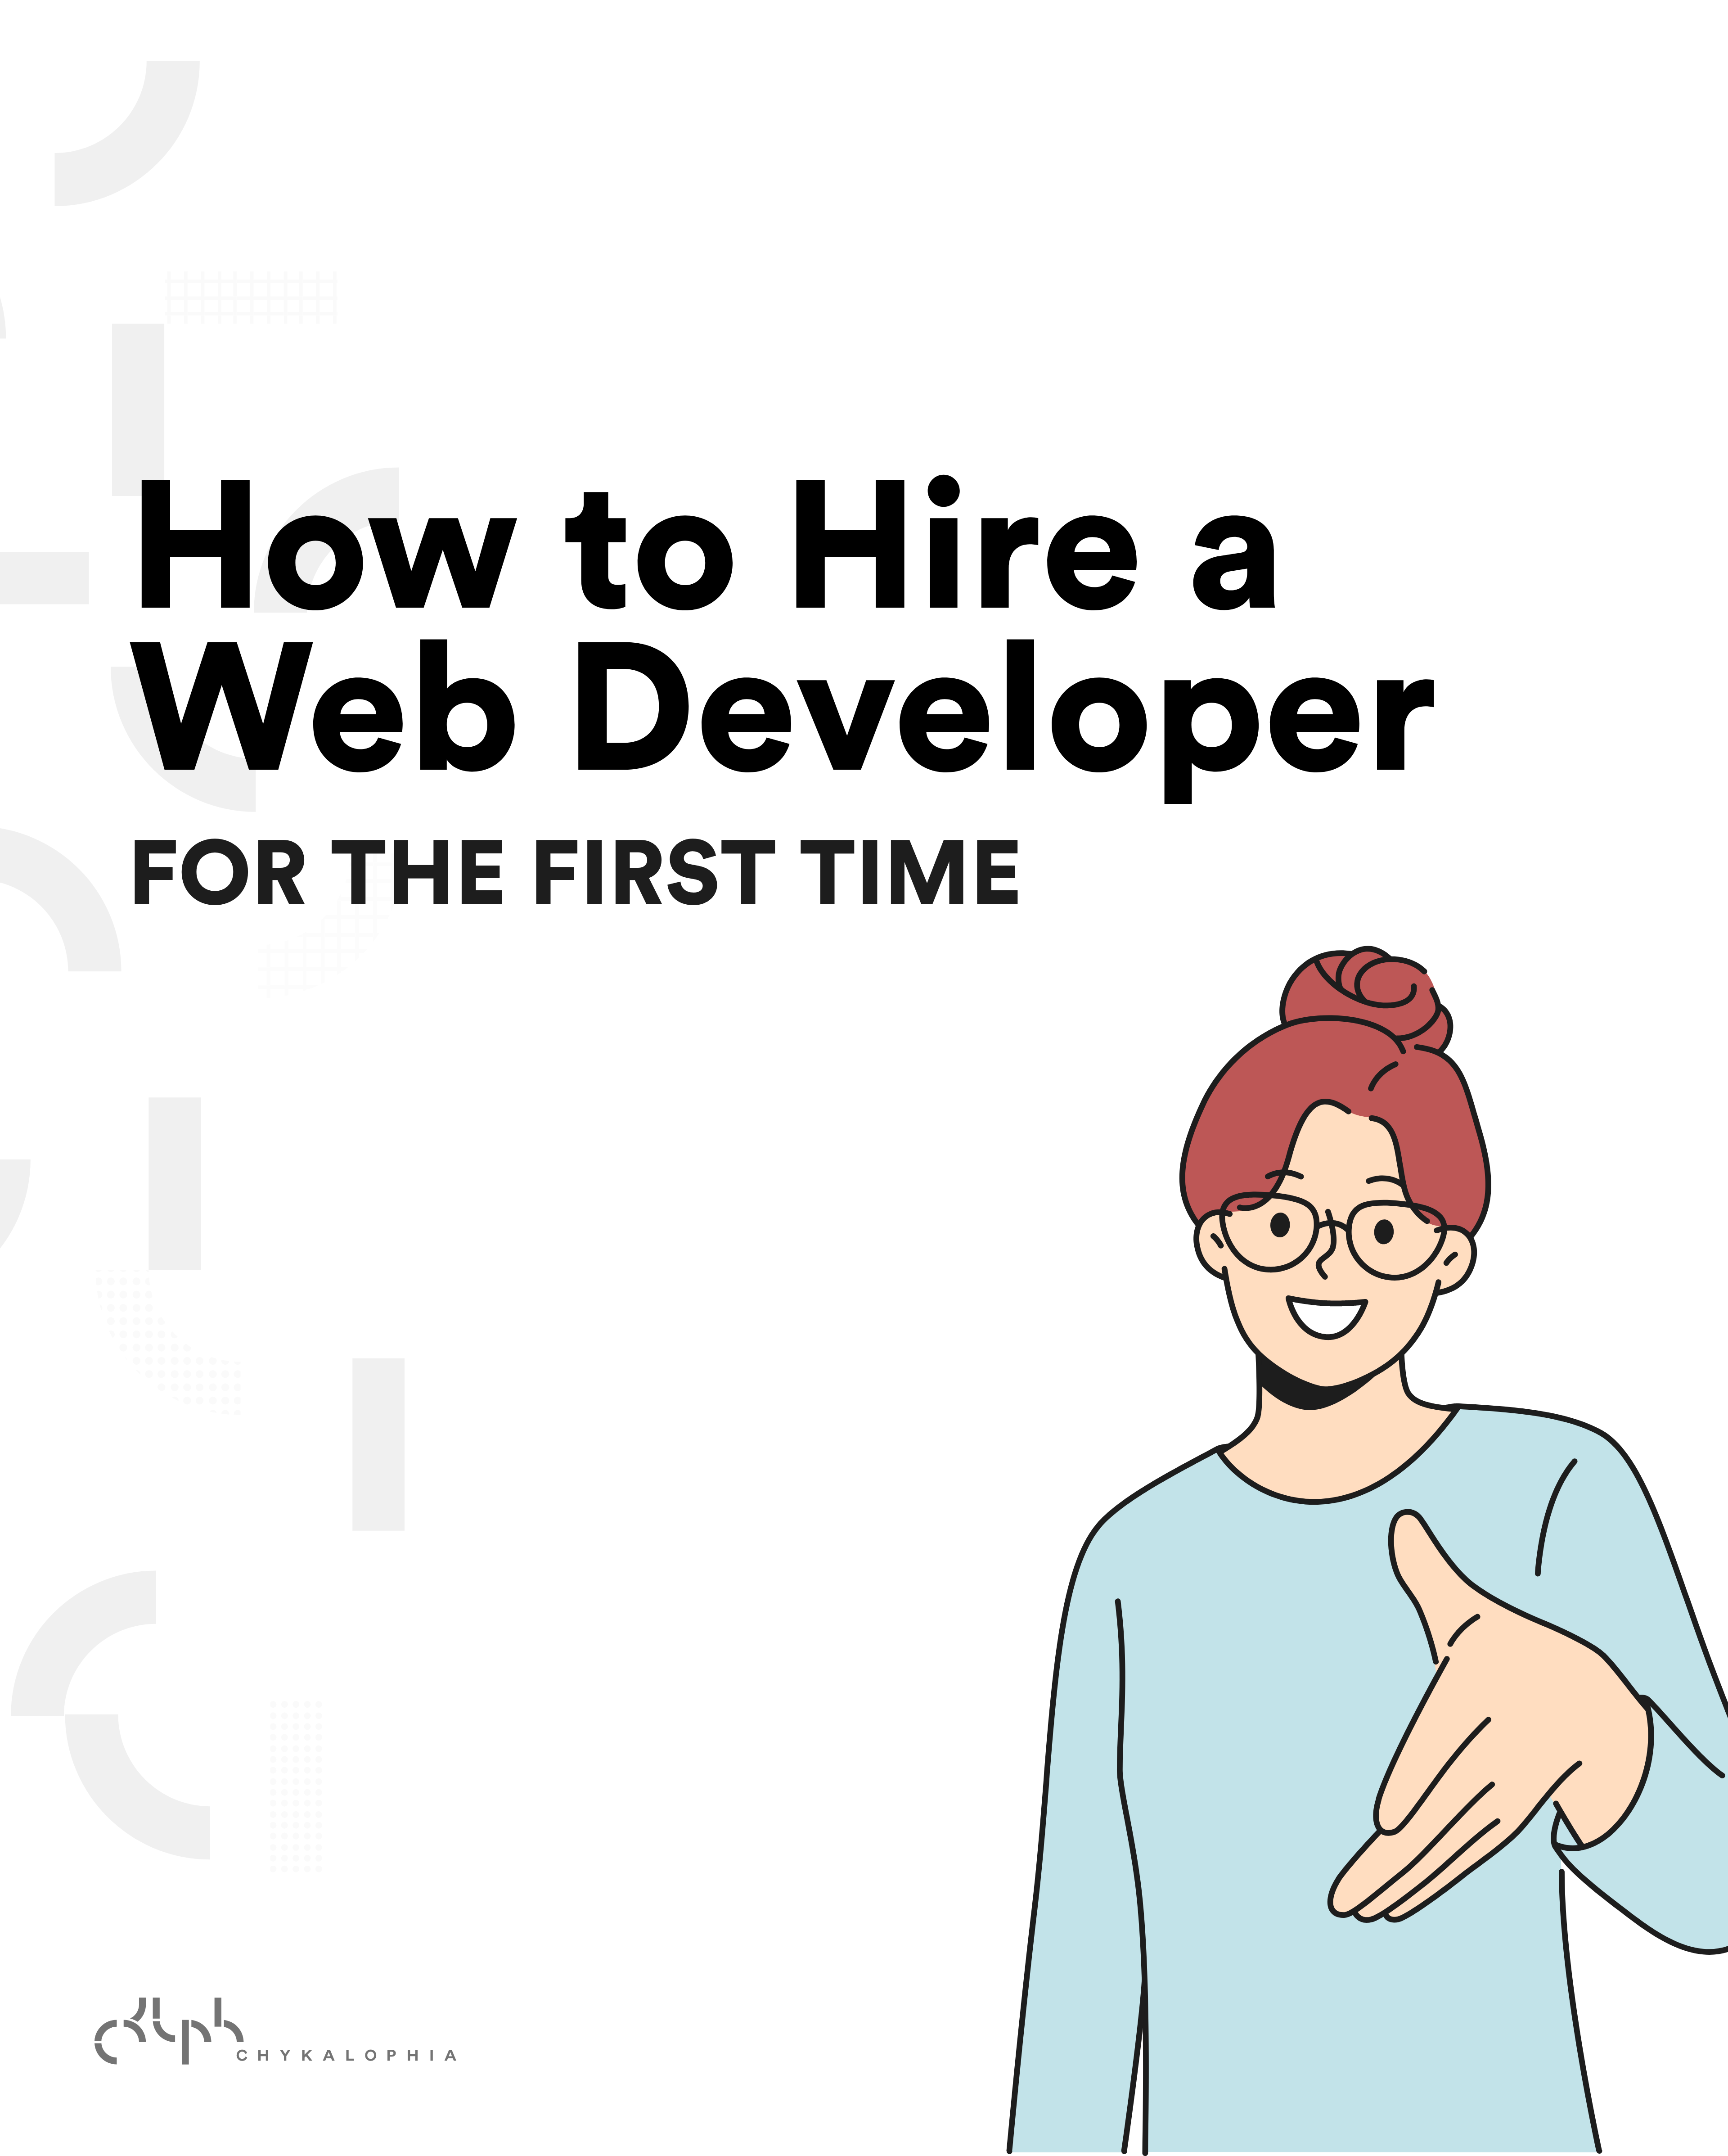 How to hire a web developer for the first time, for non-tech business owners